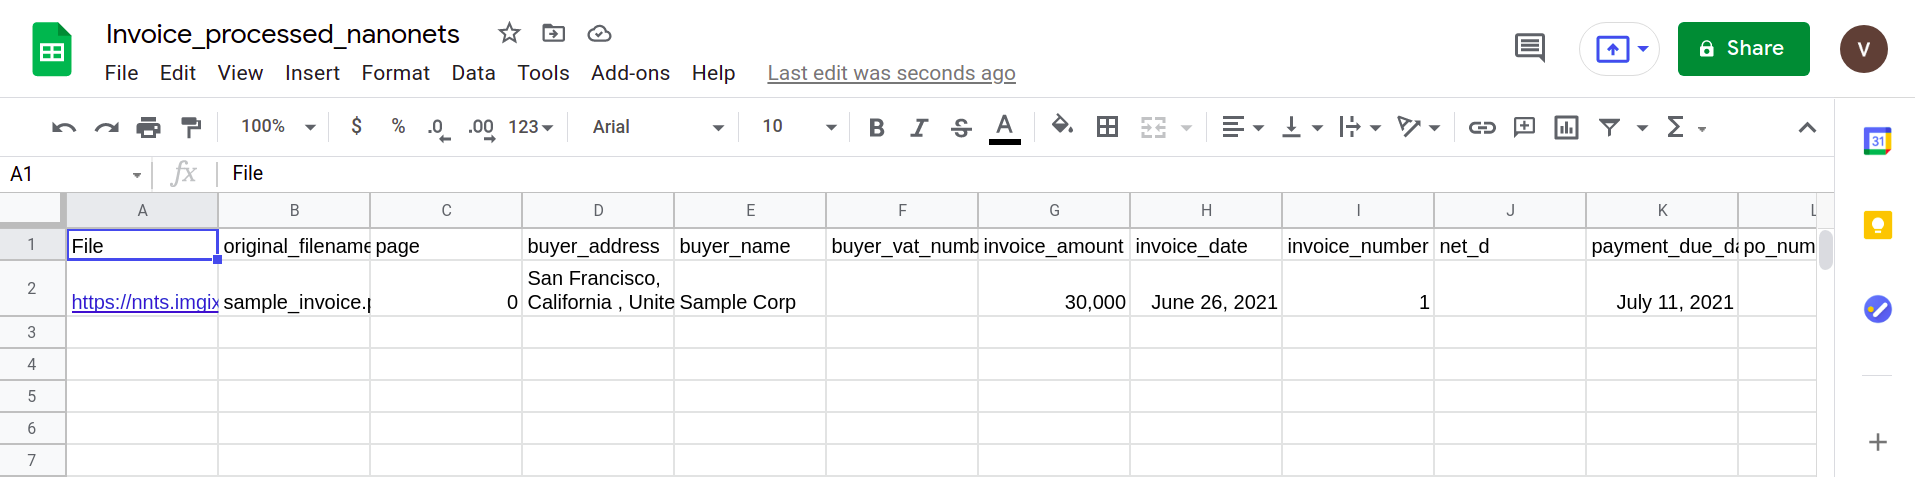 CSV data exported to a Google sheets form